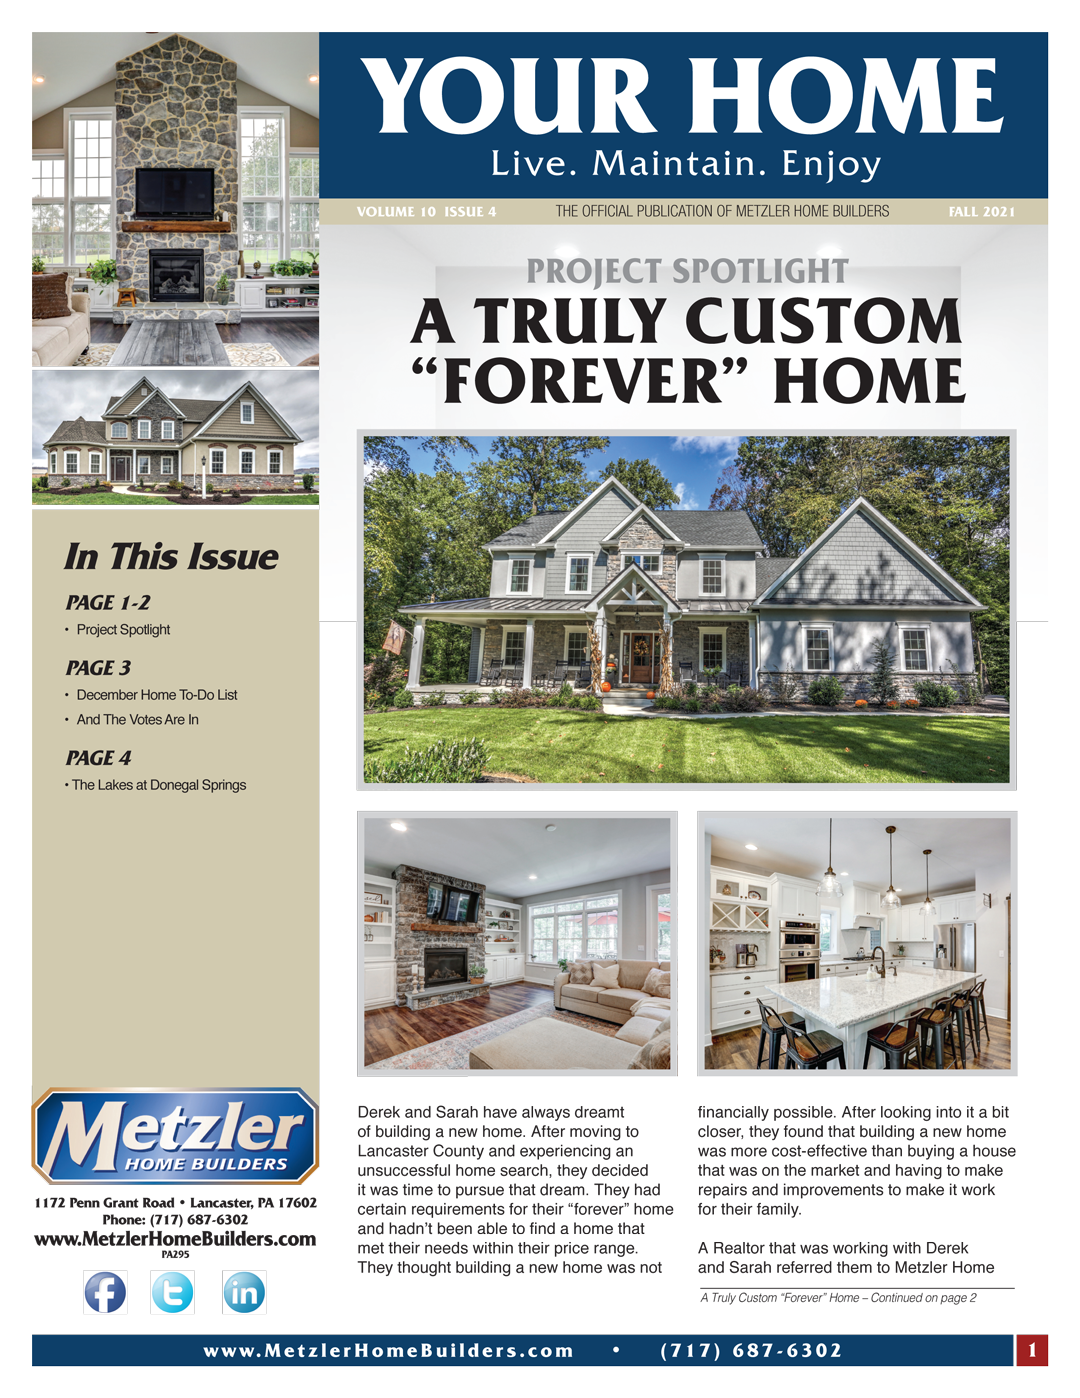 Metzler 'Your Home' Newsletter PDF cover for Autumn 2021